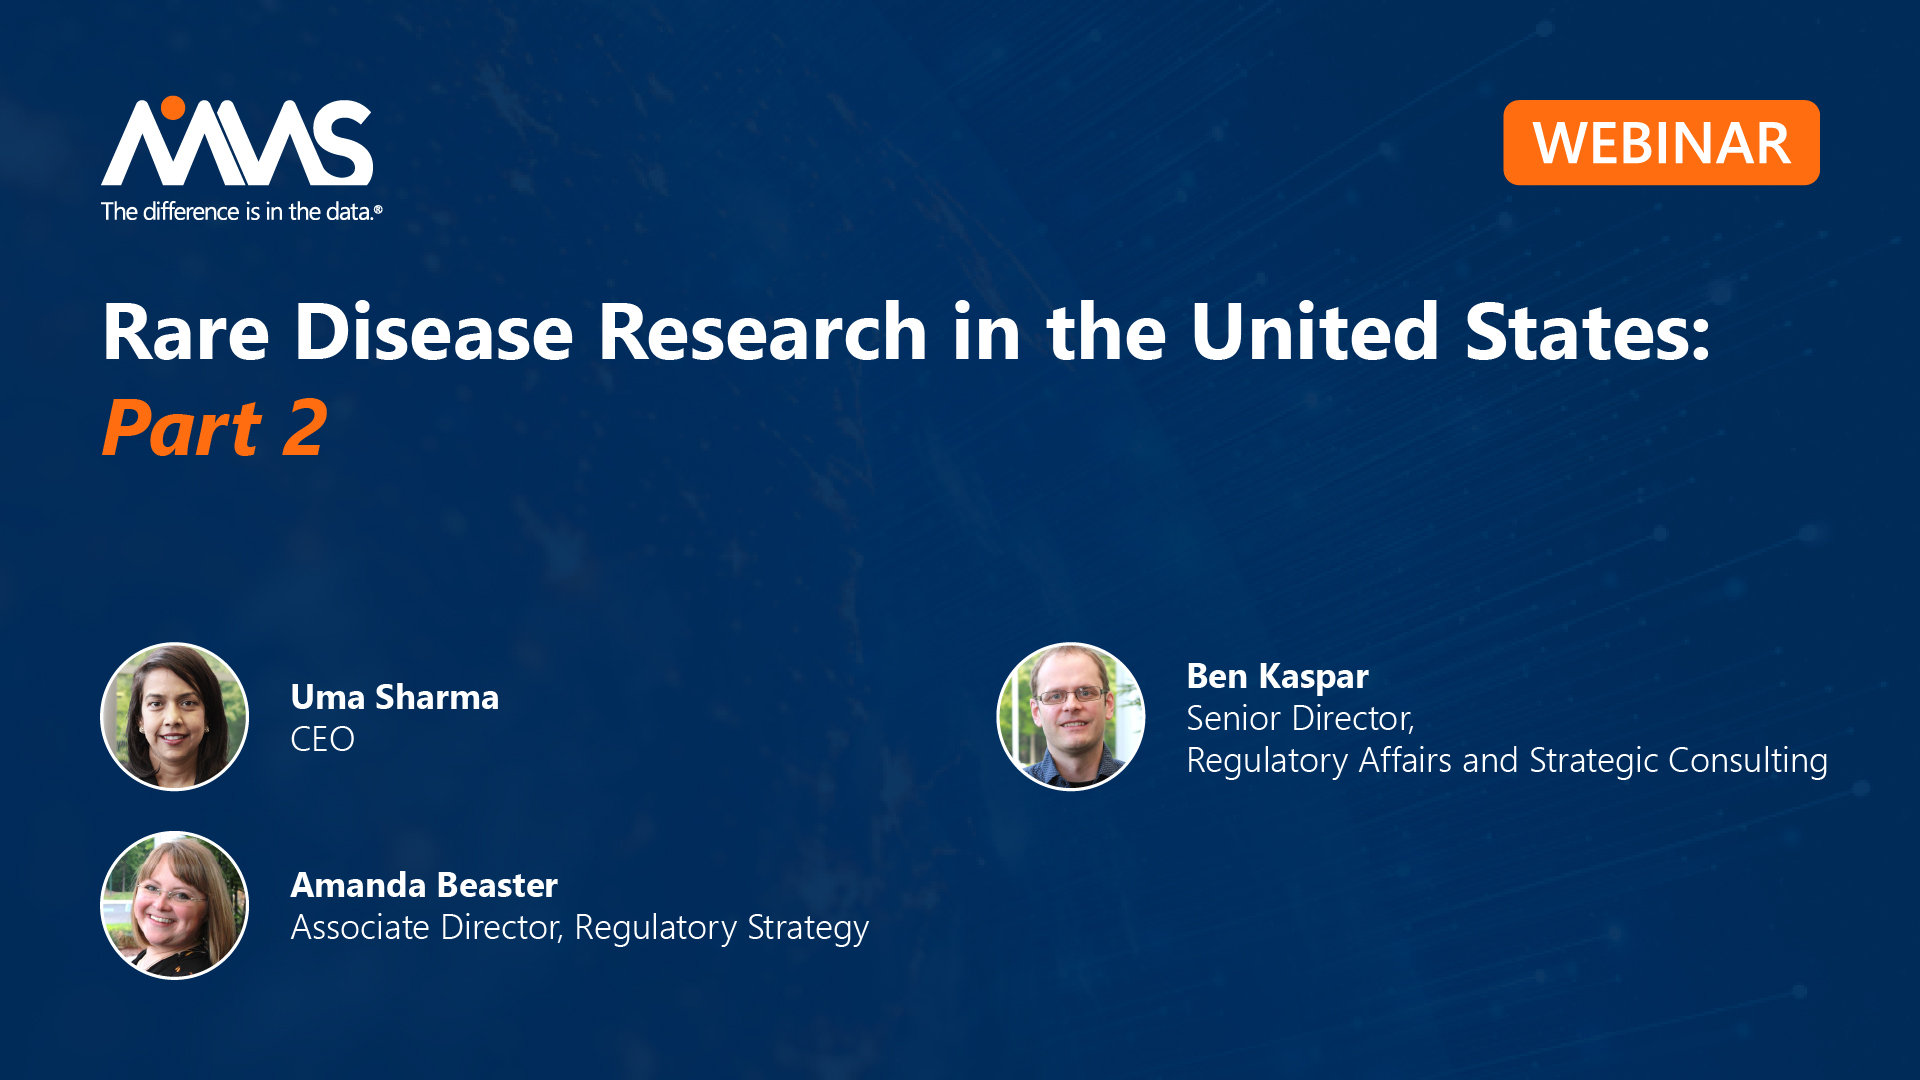 Rare Disease Research in the United States, Part 2